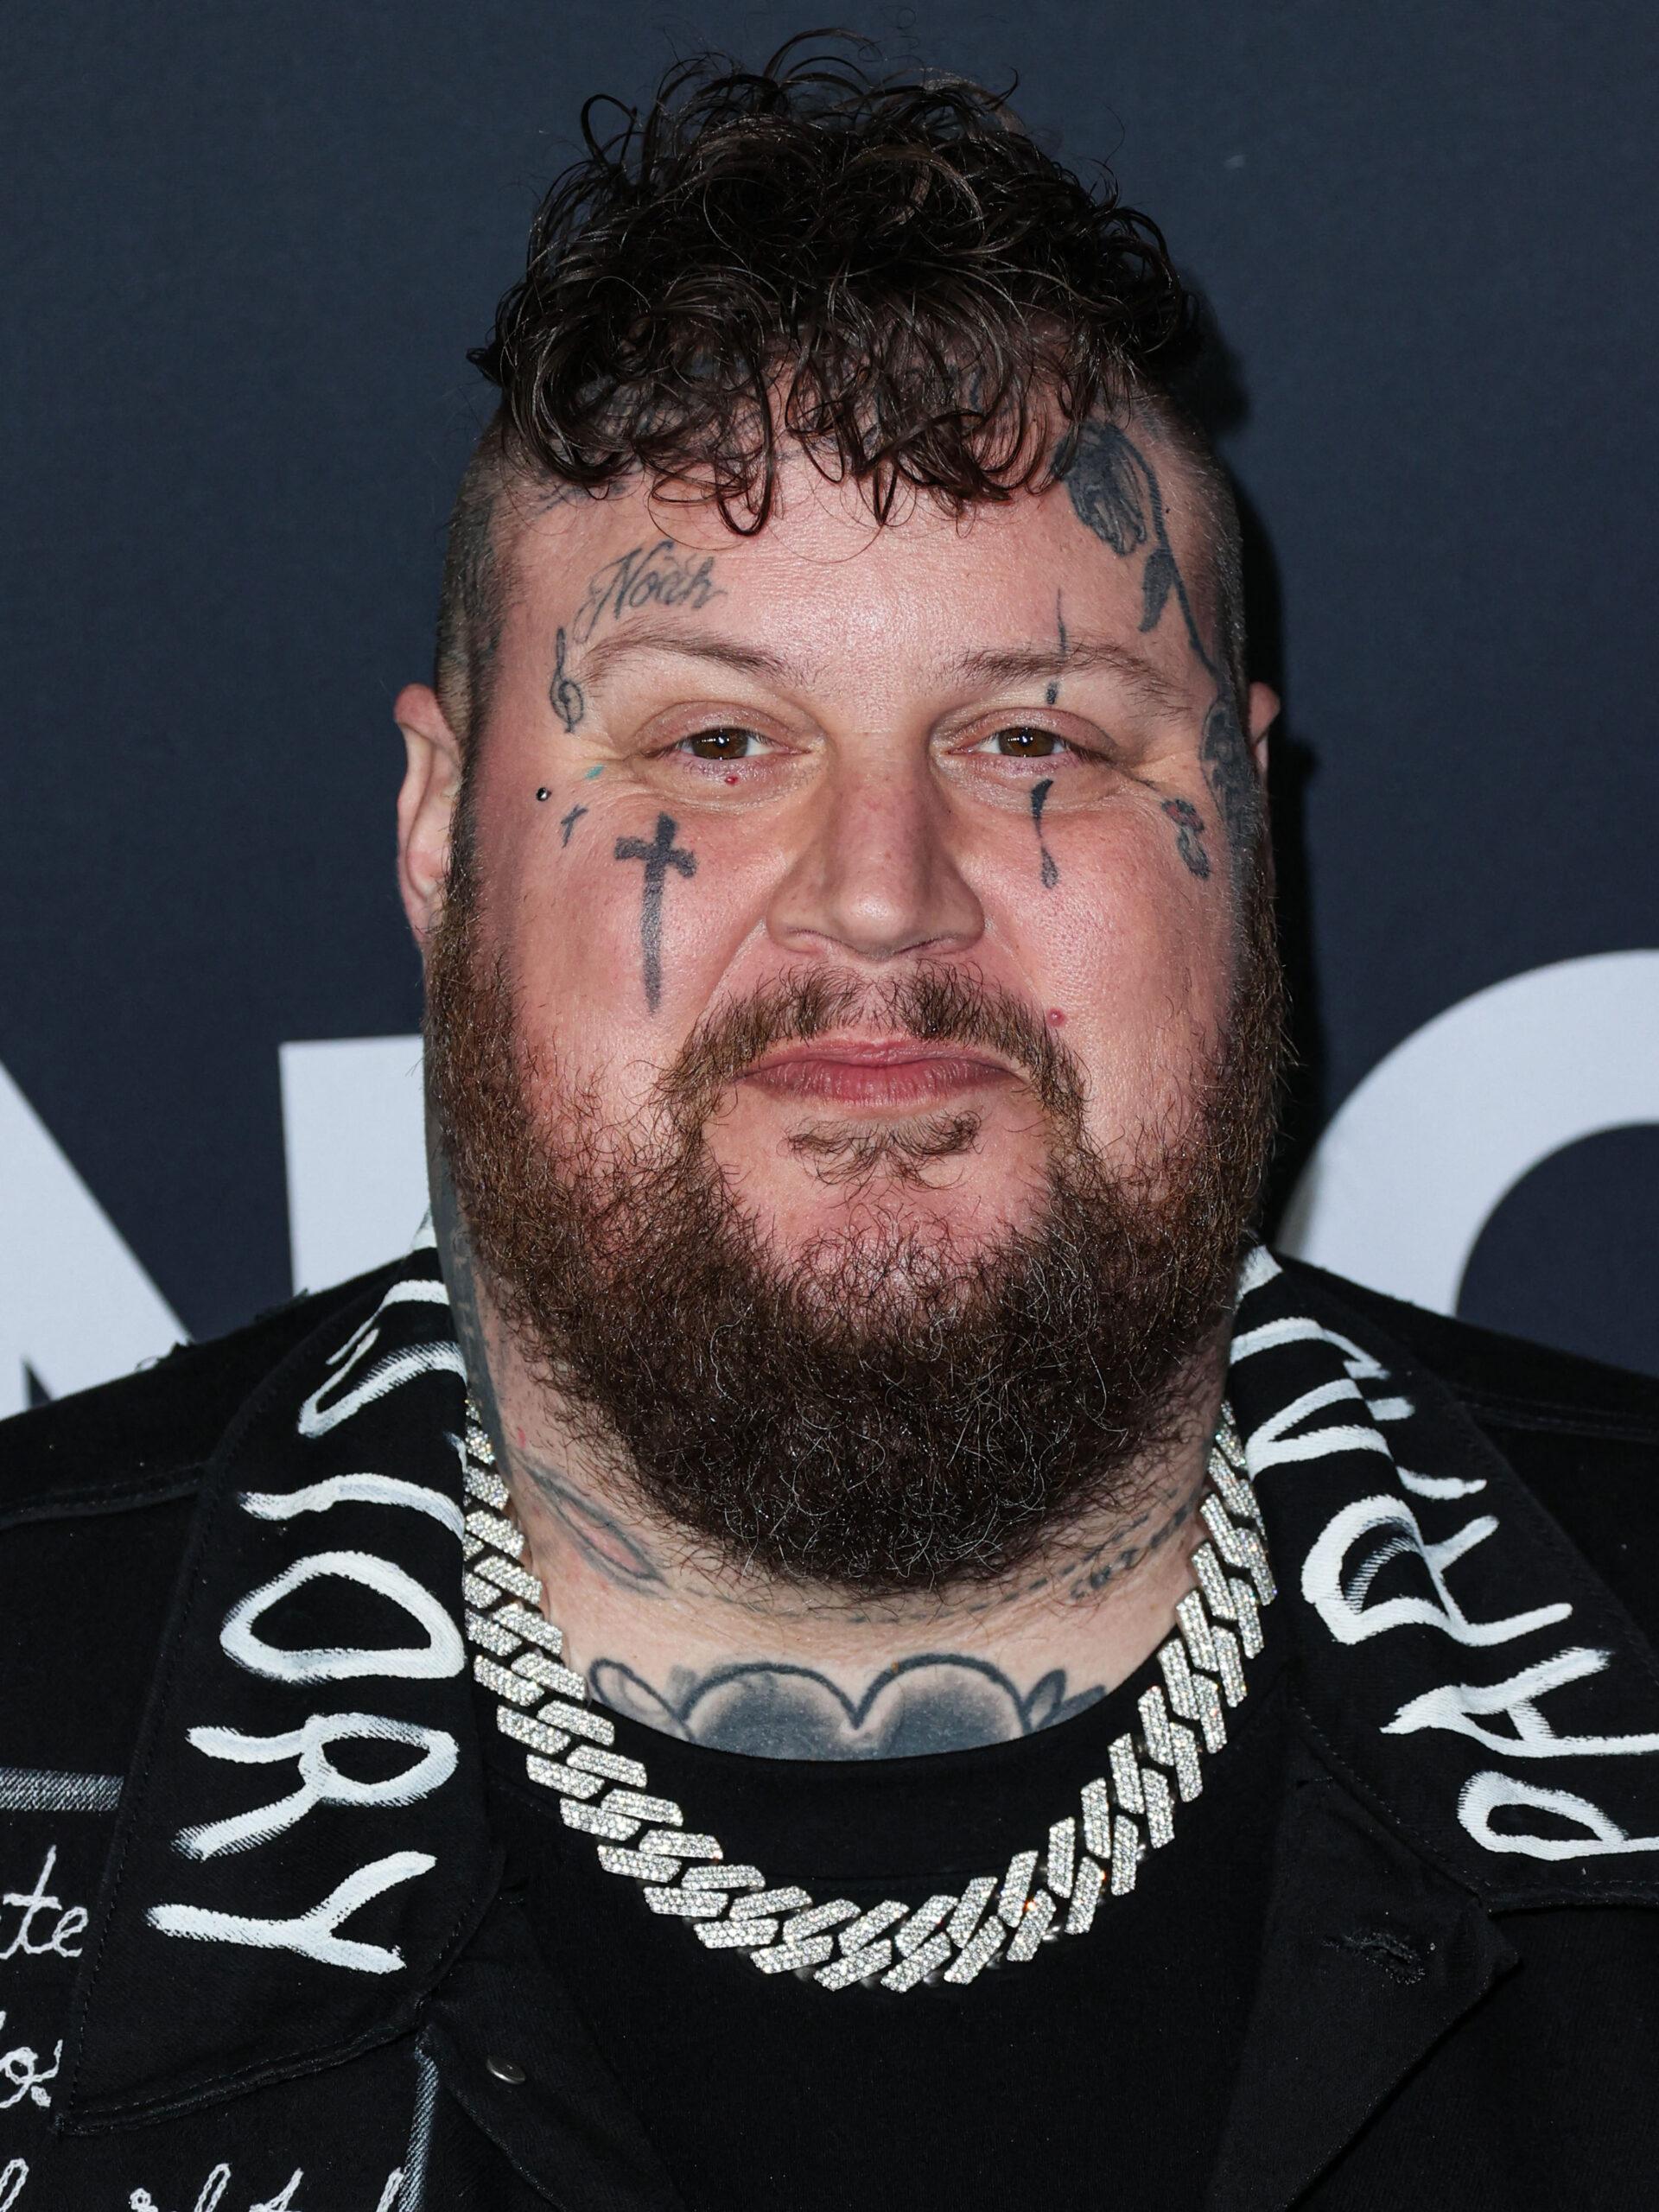 Jelly Roll Reveals Why He Is So Involved With The Fentanyl Epidemic